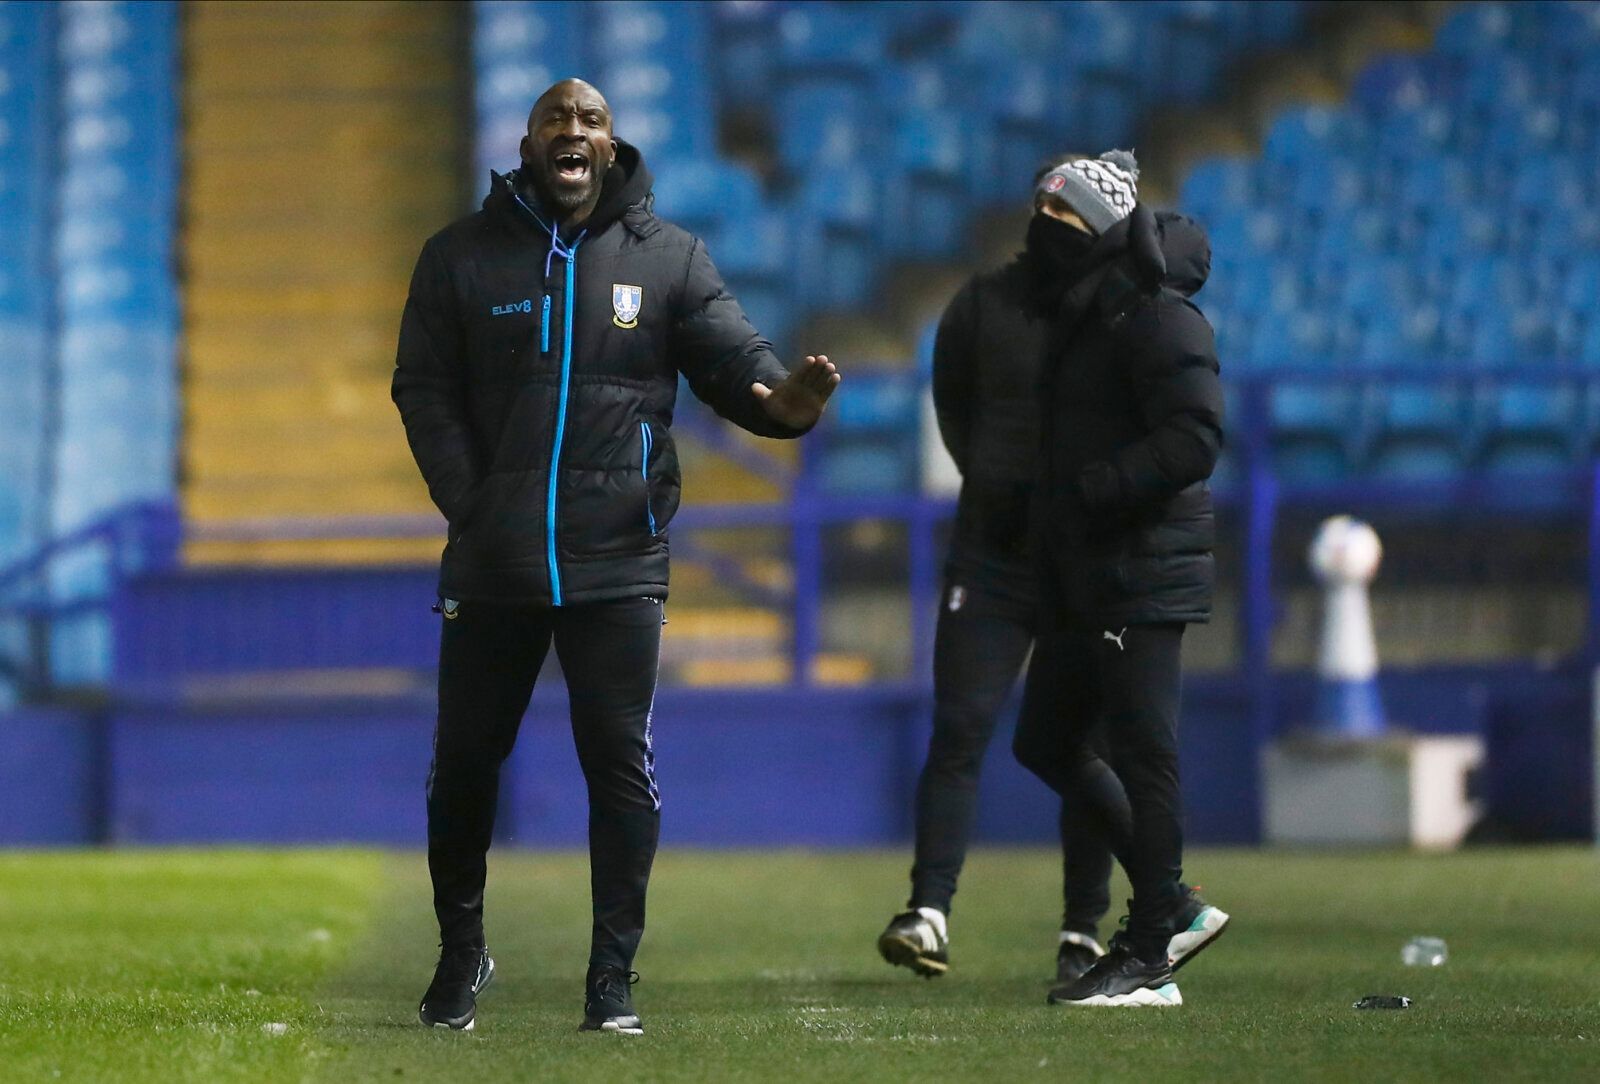 Soccer Football - Championship - Sheffield Wednesday v Rotherham United - Hillsborough, Sheffield, Britain - March 3, 2021   Sheffield Wednesday manager Darren Moore reacts Action Images/Jason Cairnduff EDITORIAL USE ONLY. No use with unauthorized audio, video, data, fixture lists, club/league logos or 'live' services. Online in-match use limited to 75 images, no video emulation. No use in betting, games or single club /league/player publications.  Please contact your account representative for 